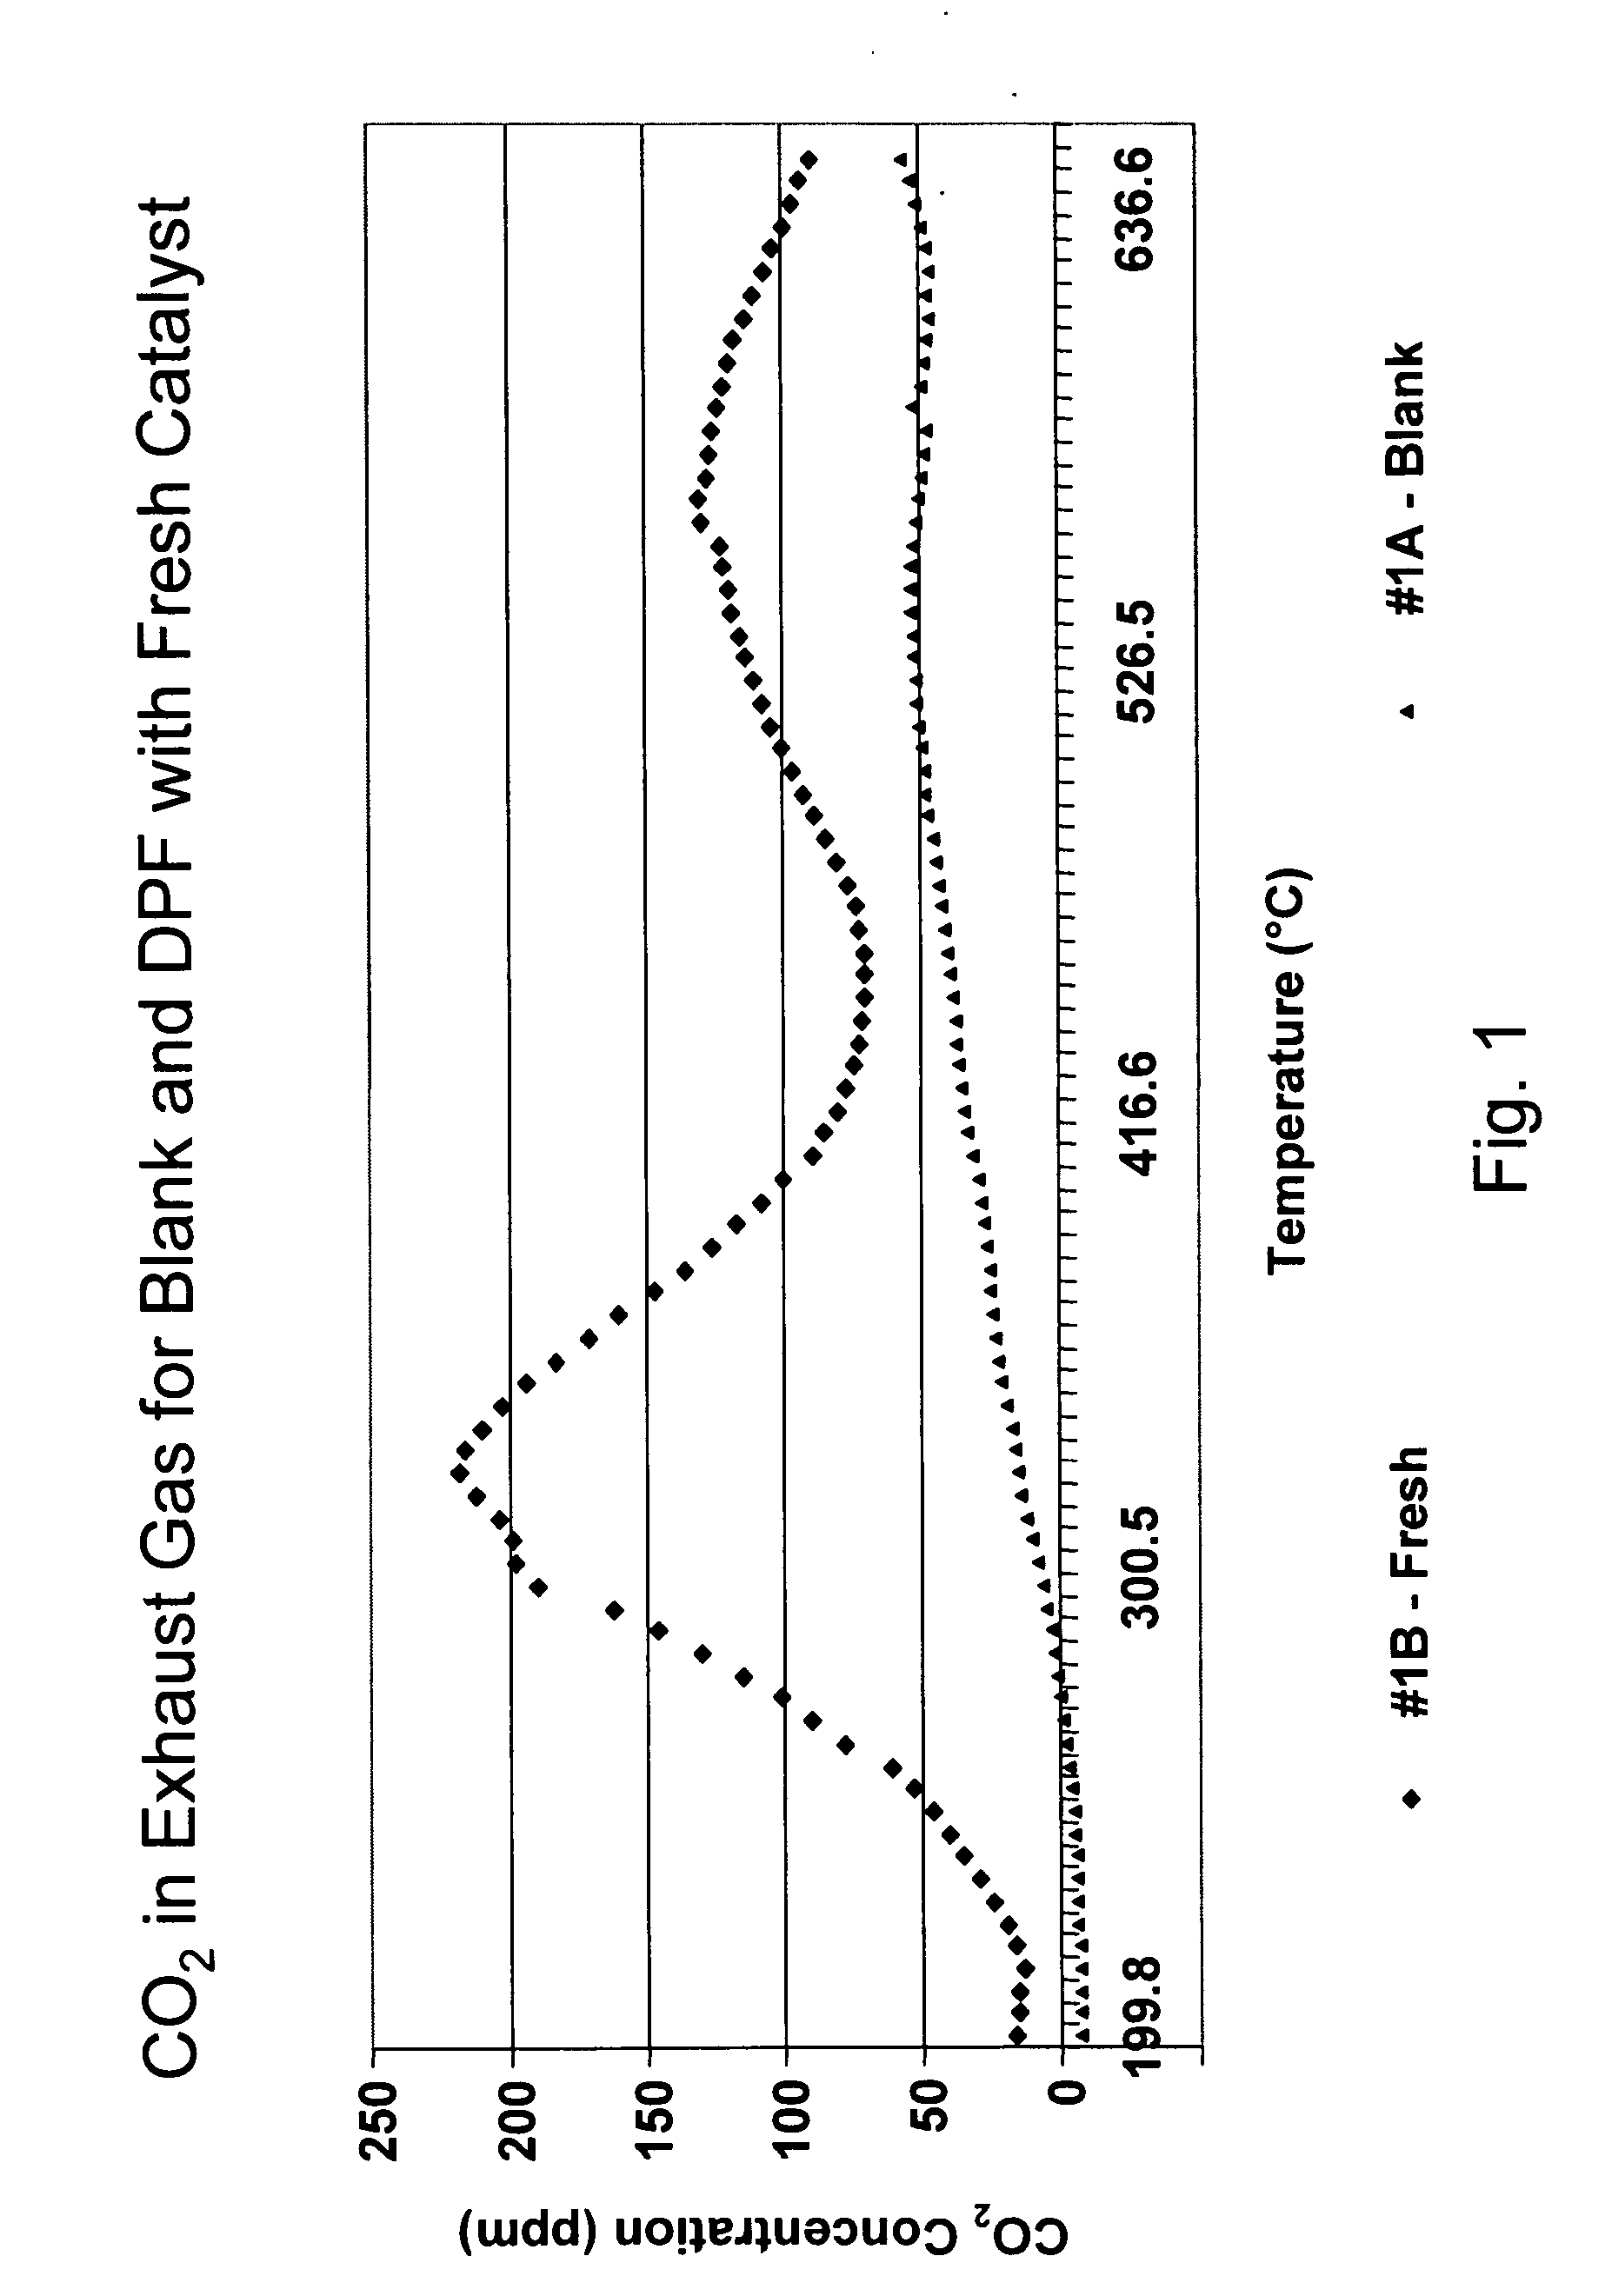 Platinum group metal-free catalysts for reducing the ignition temperature of particulates on a diesel particulate filter